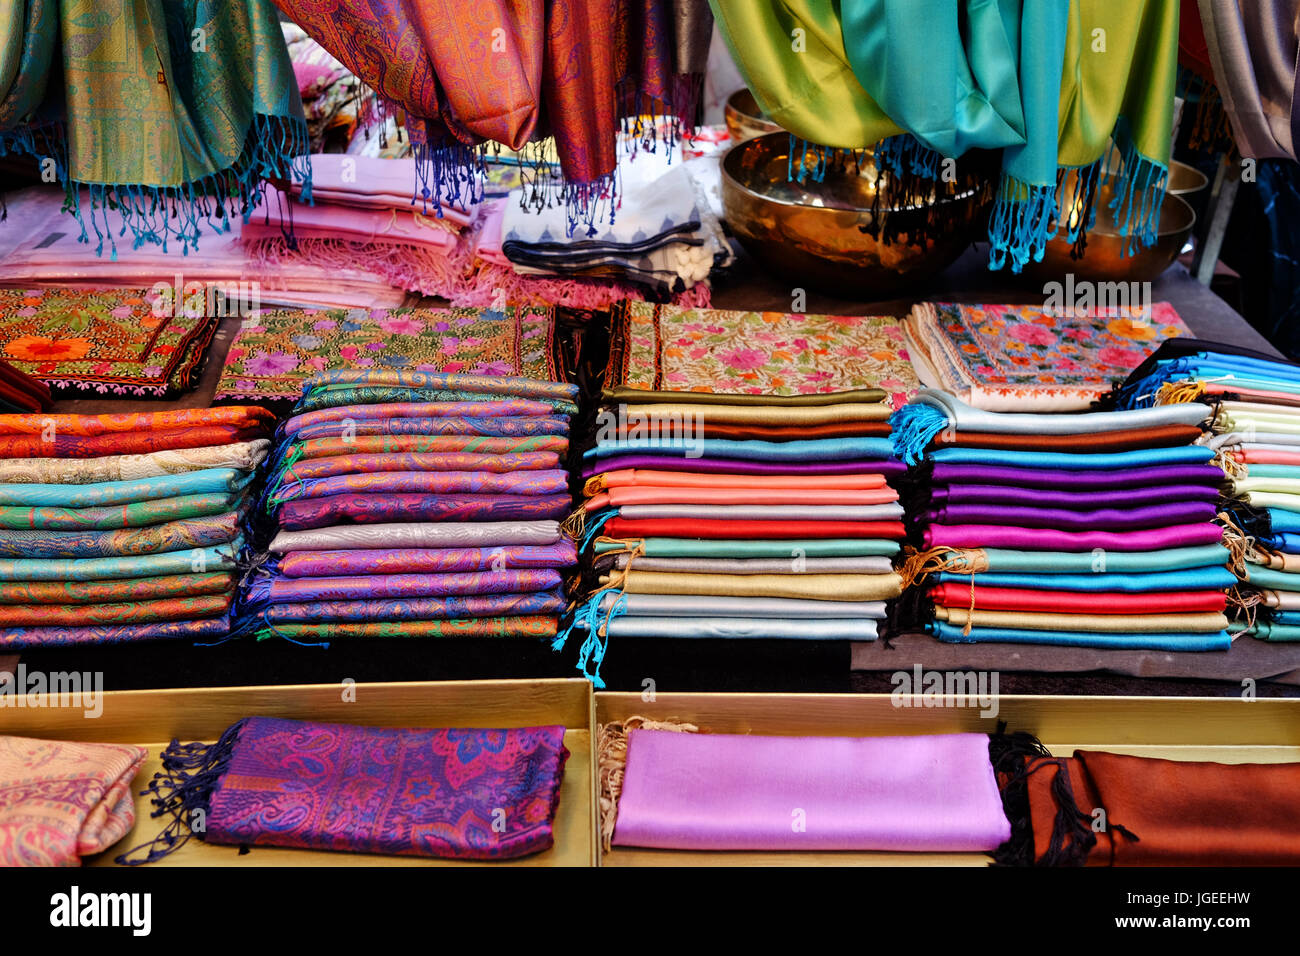 Market stall selling silk items in Spitalfields Market in the East End of London Stock Photo